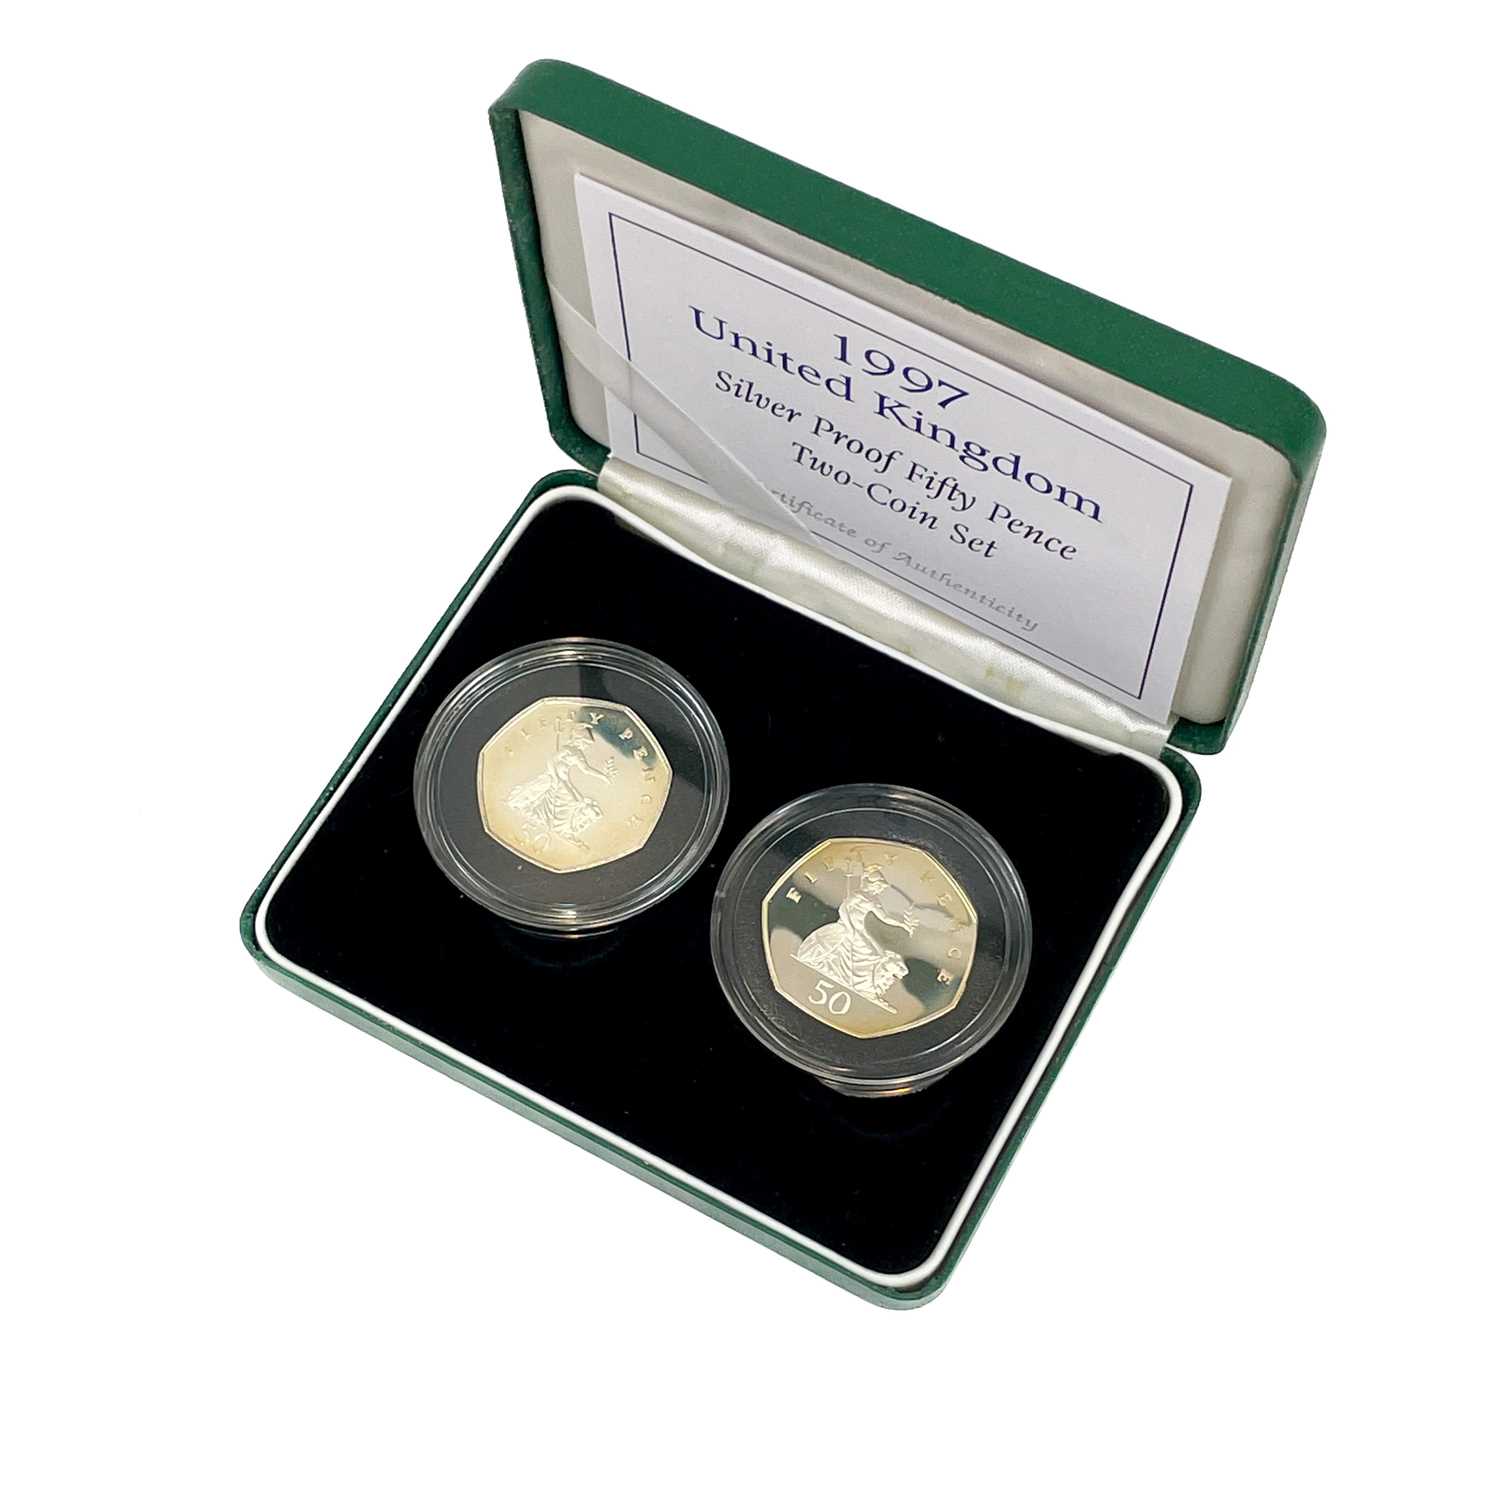 Great Britain 50 pence Silver proof cased coins 1992 to 1997 (x3). - Image 2 of 5